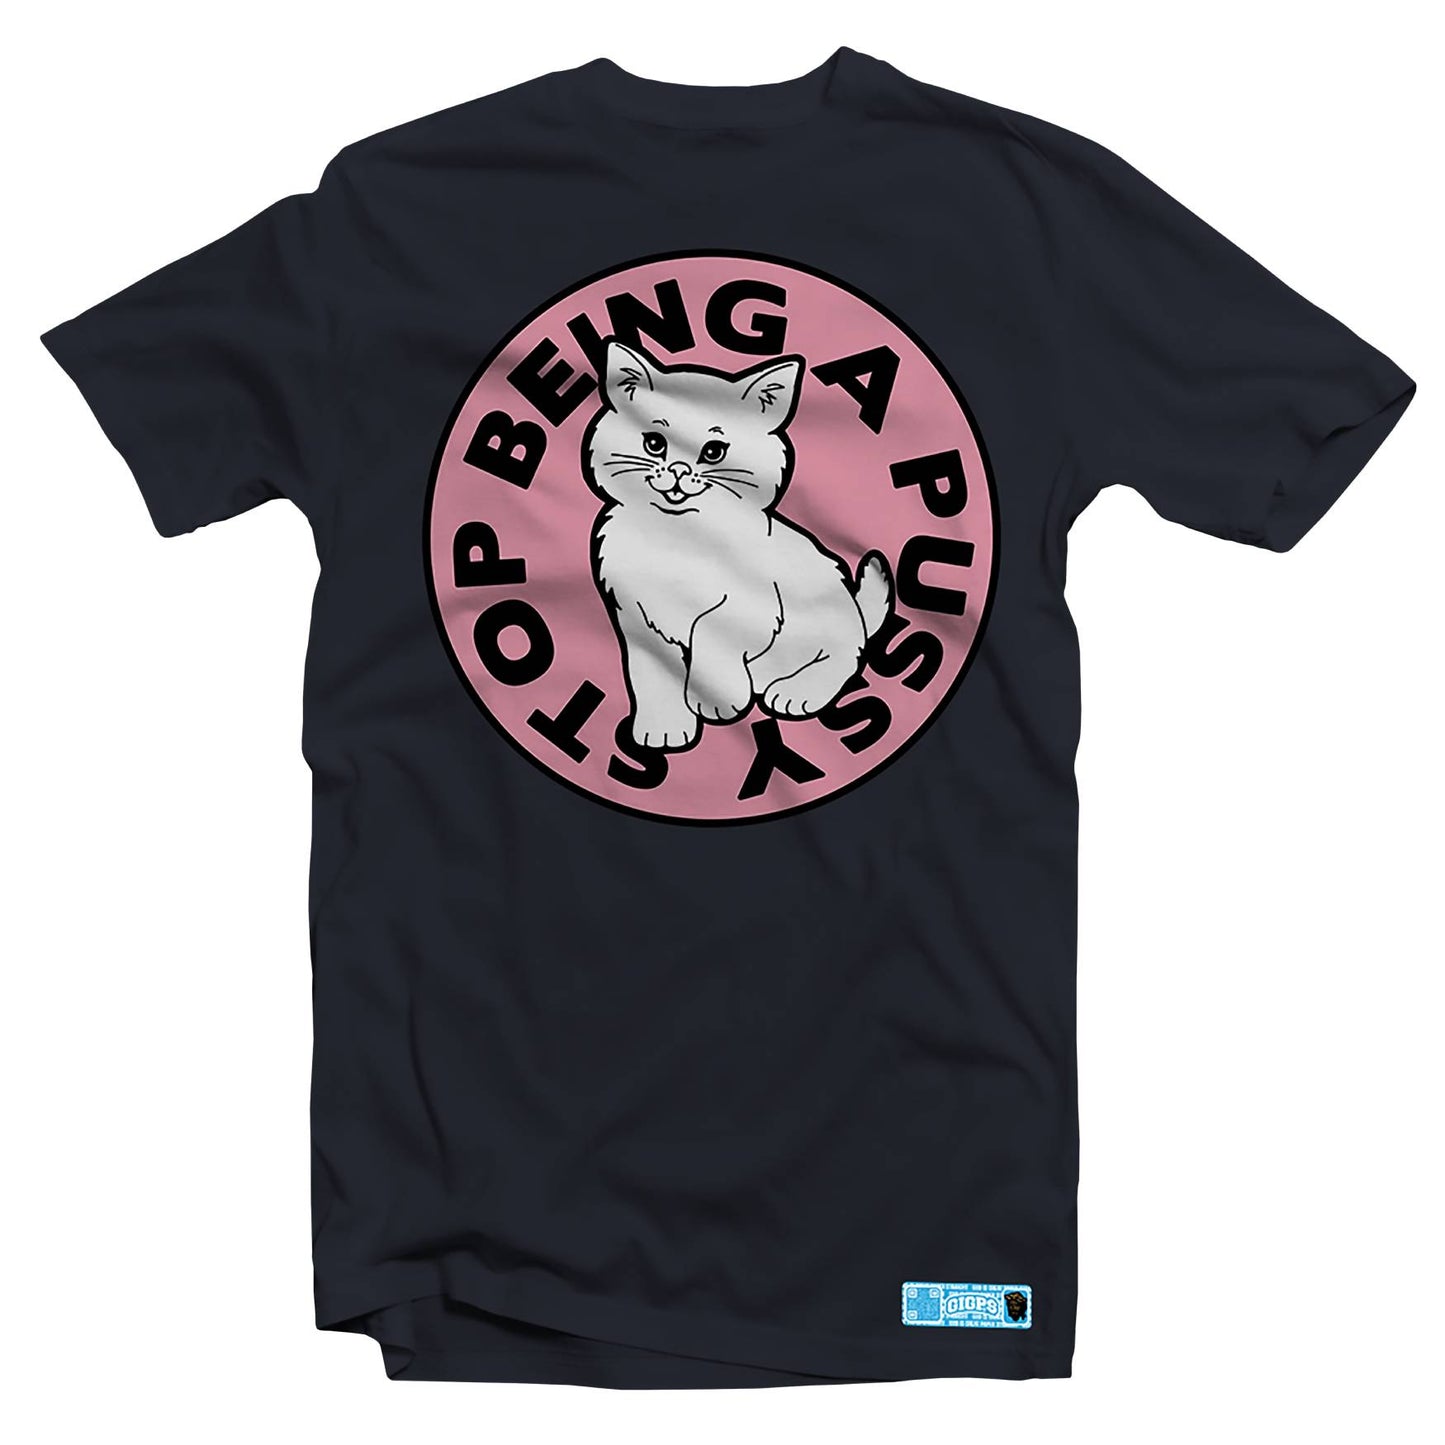 STOP BEING A PUSSY TEE - BLACK